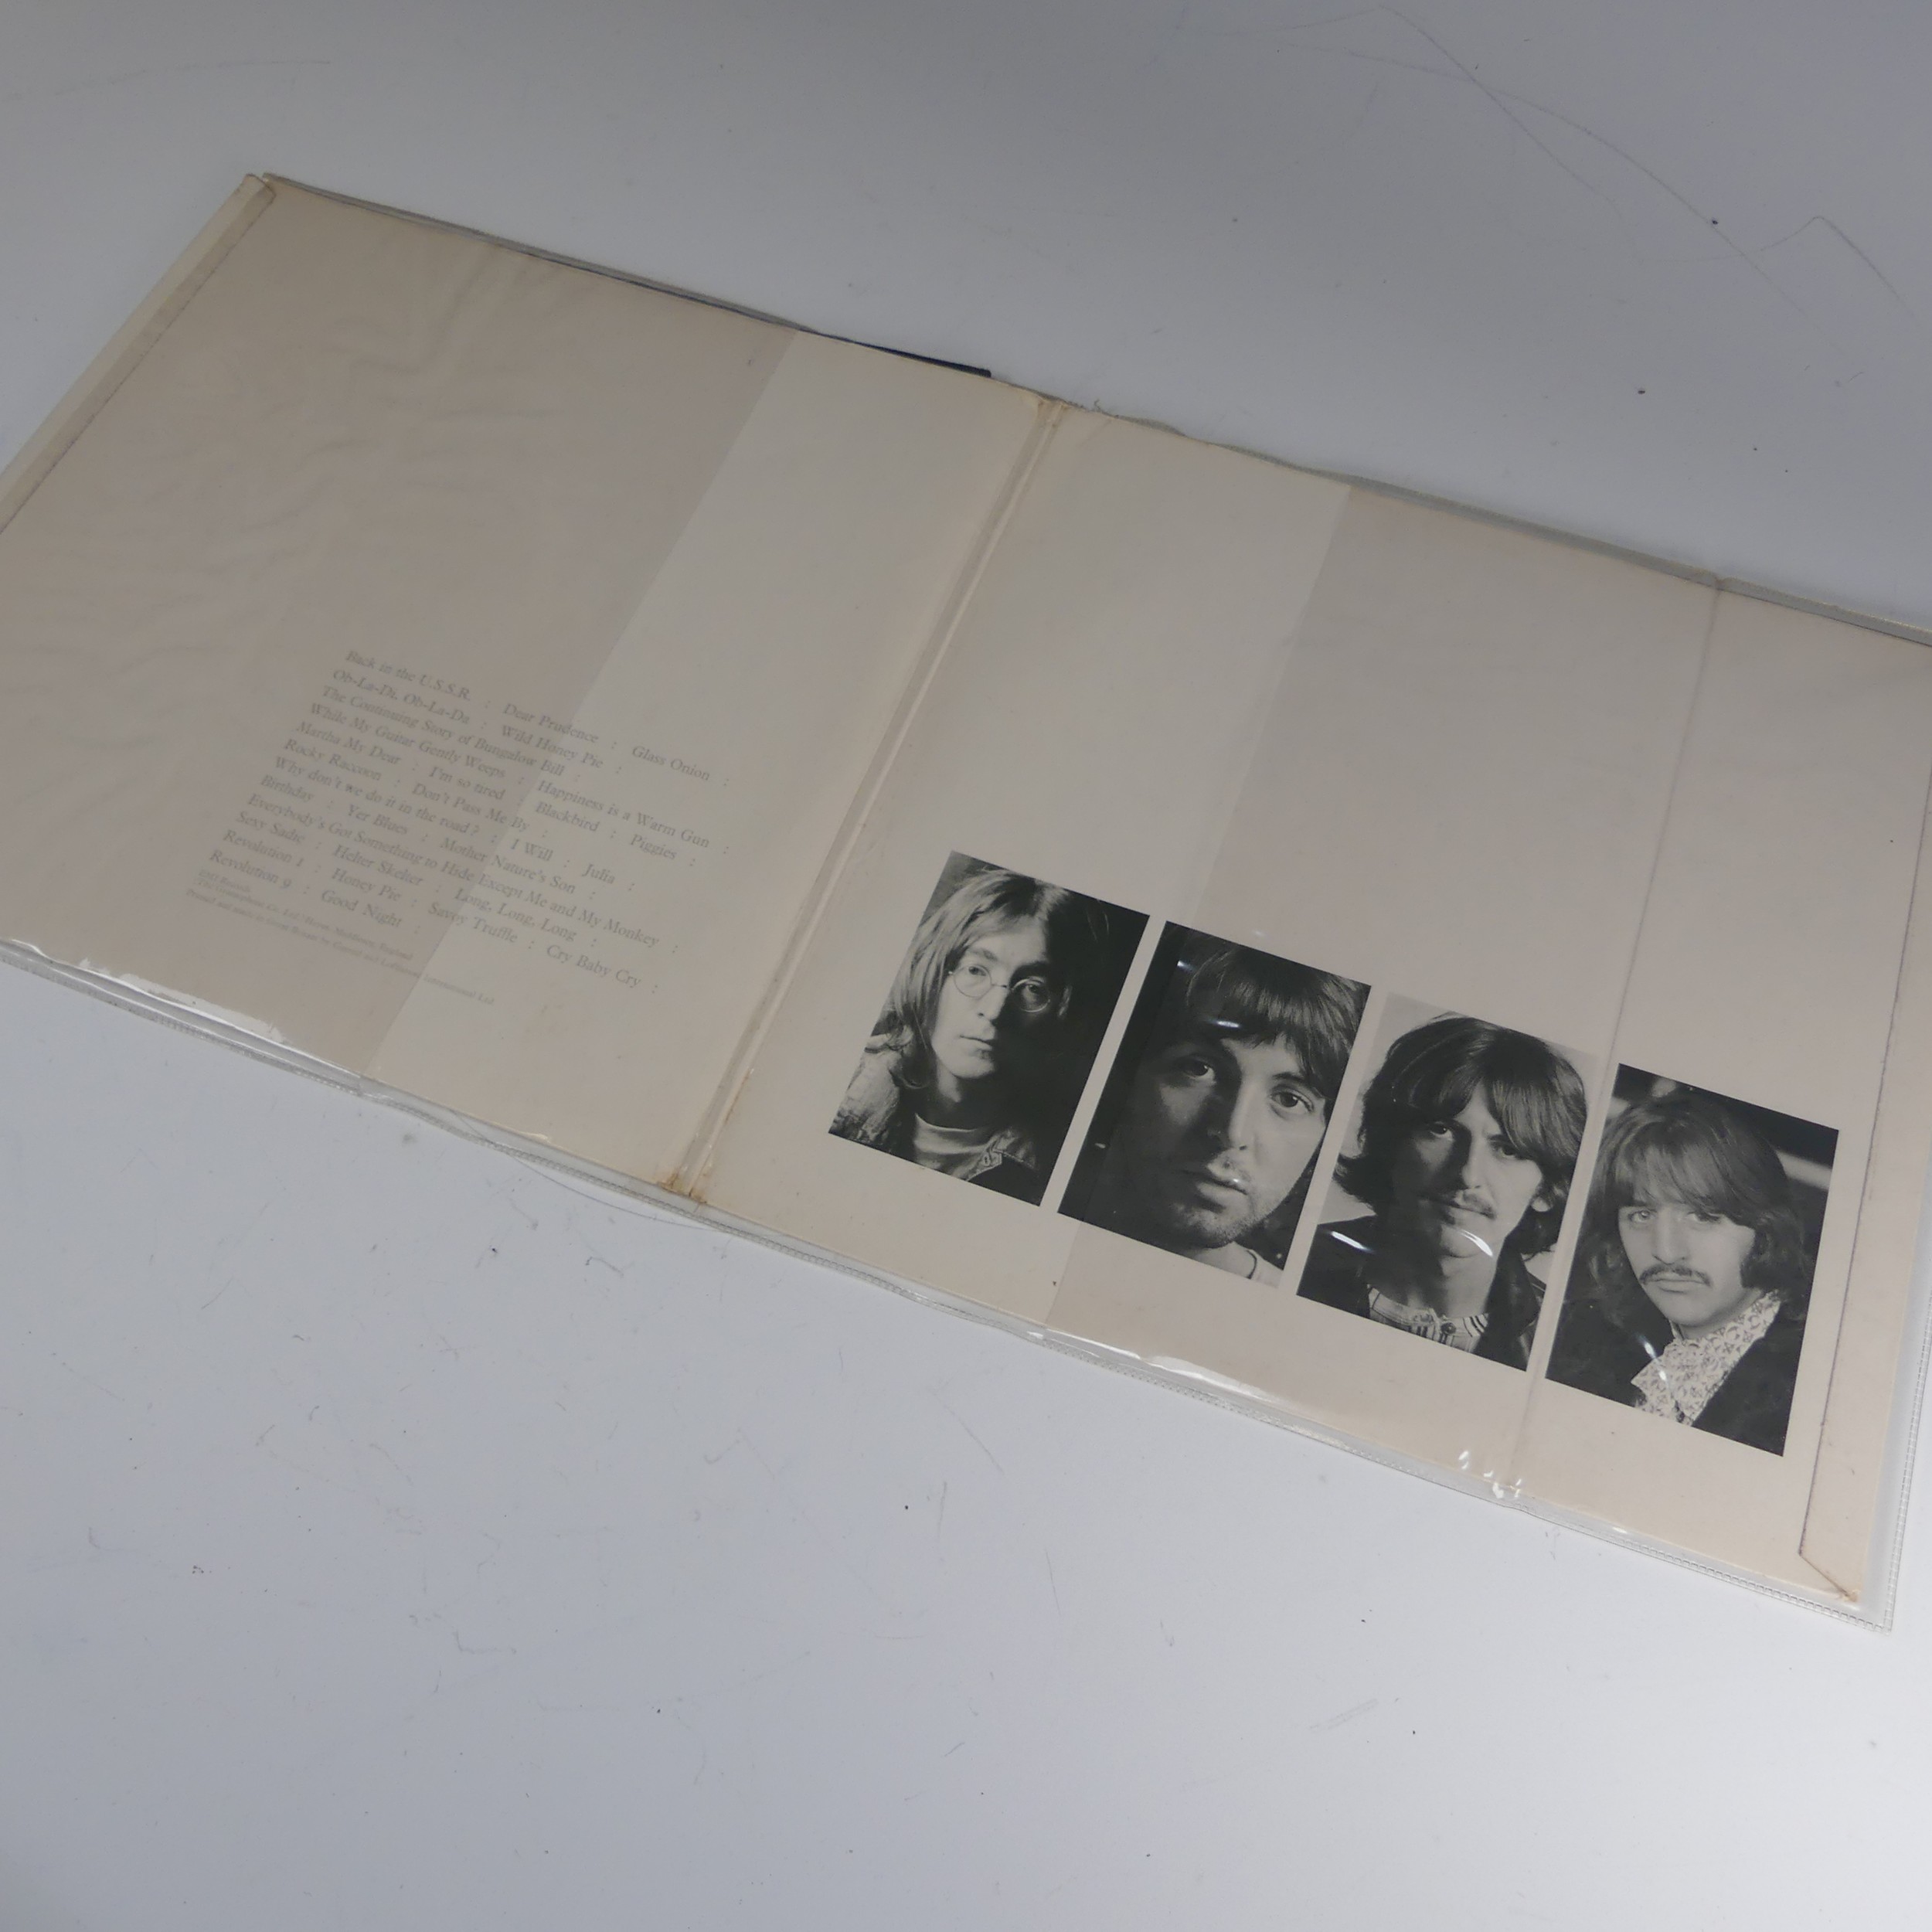 Vinyl Records; The Beatles 'White Album', UK top opener - PCS 7067/ 68, no. 0515489, complete with - Image 5 of 5